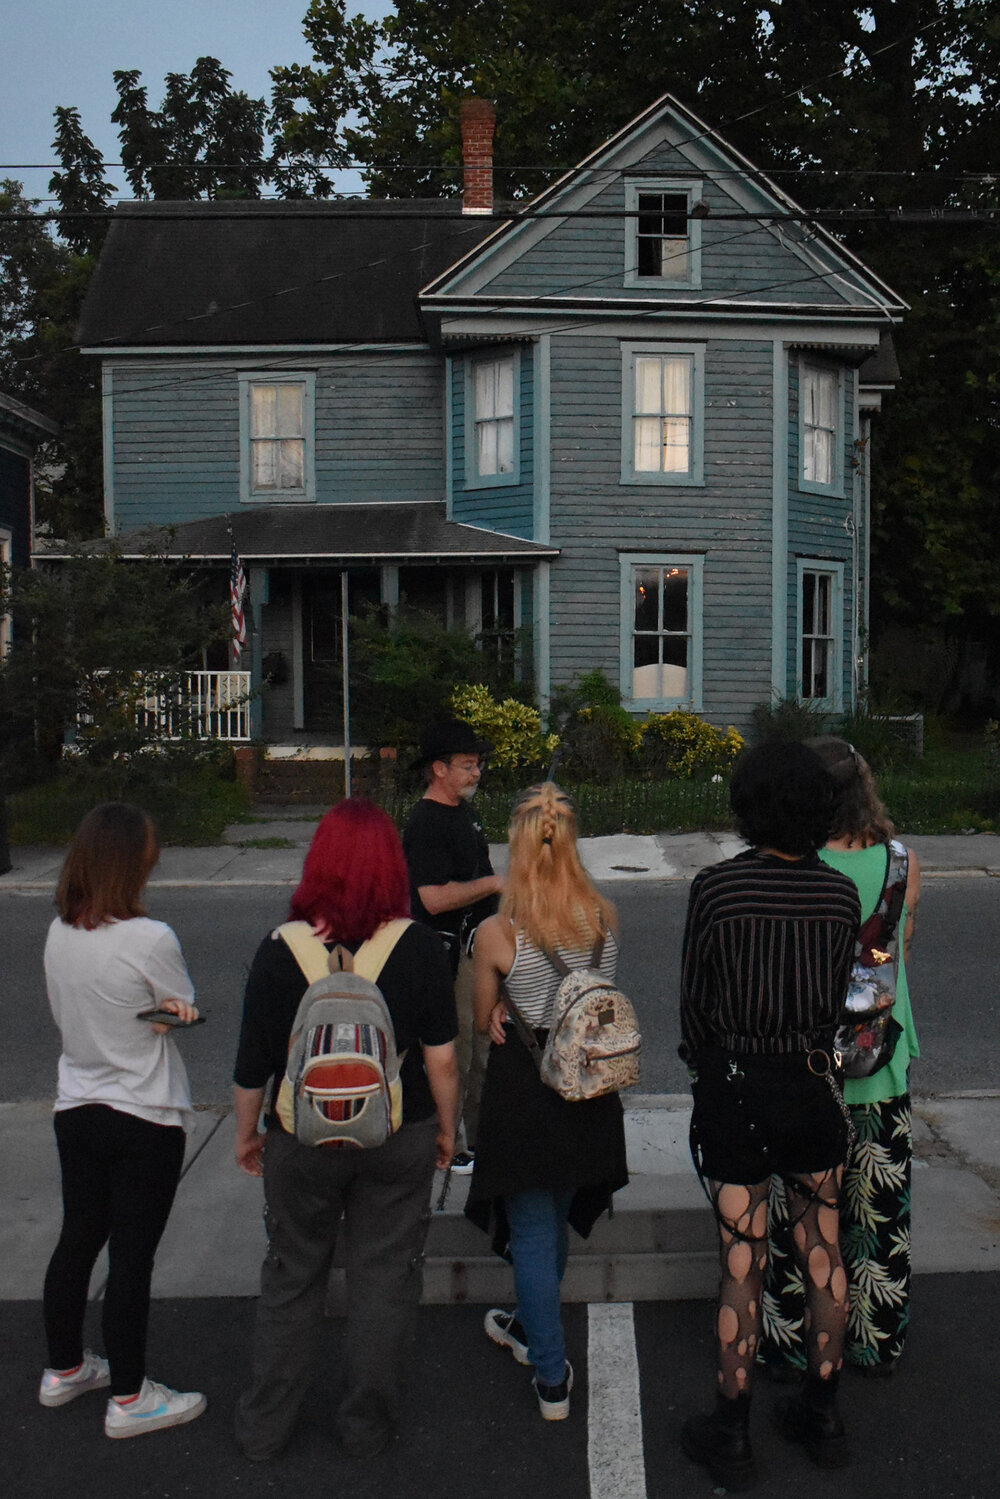 Ghostly tours tell spooky stories of old Delmarva | Bay to Bay News